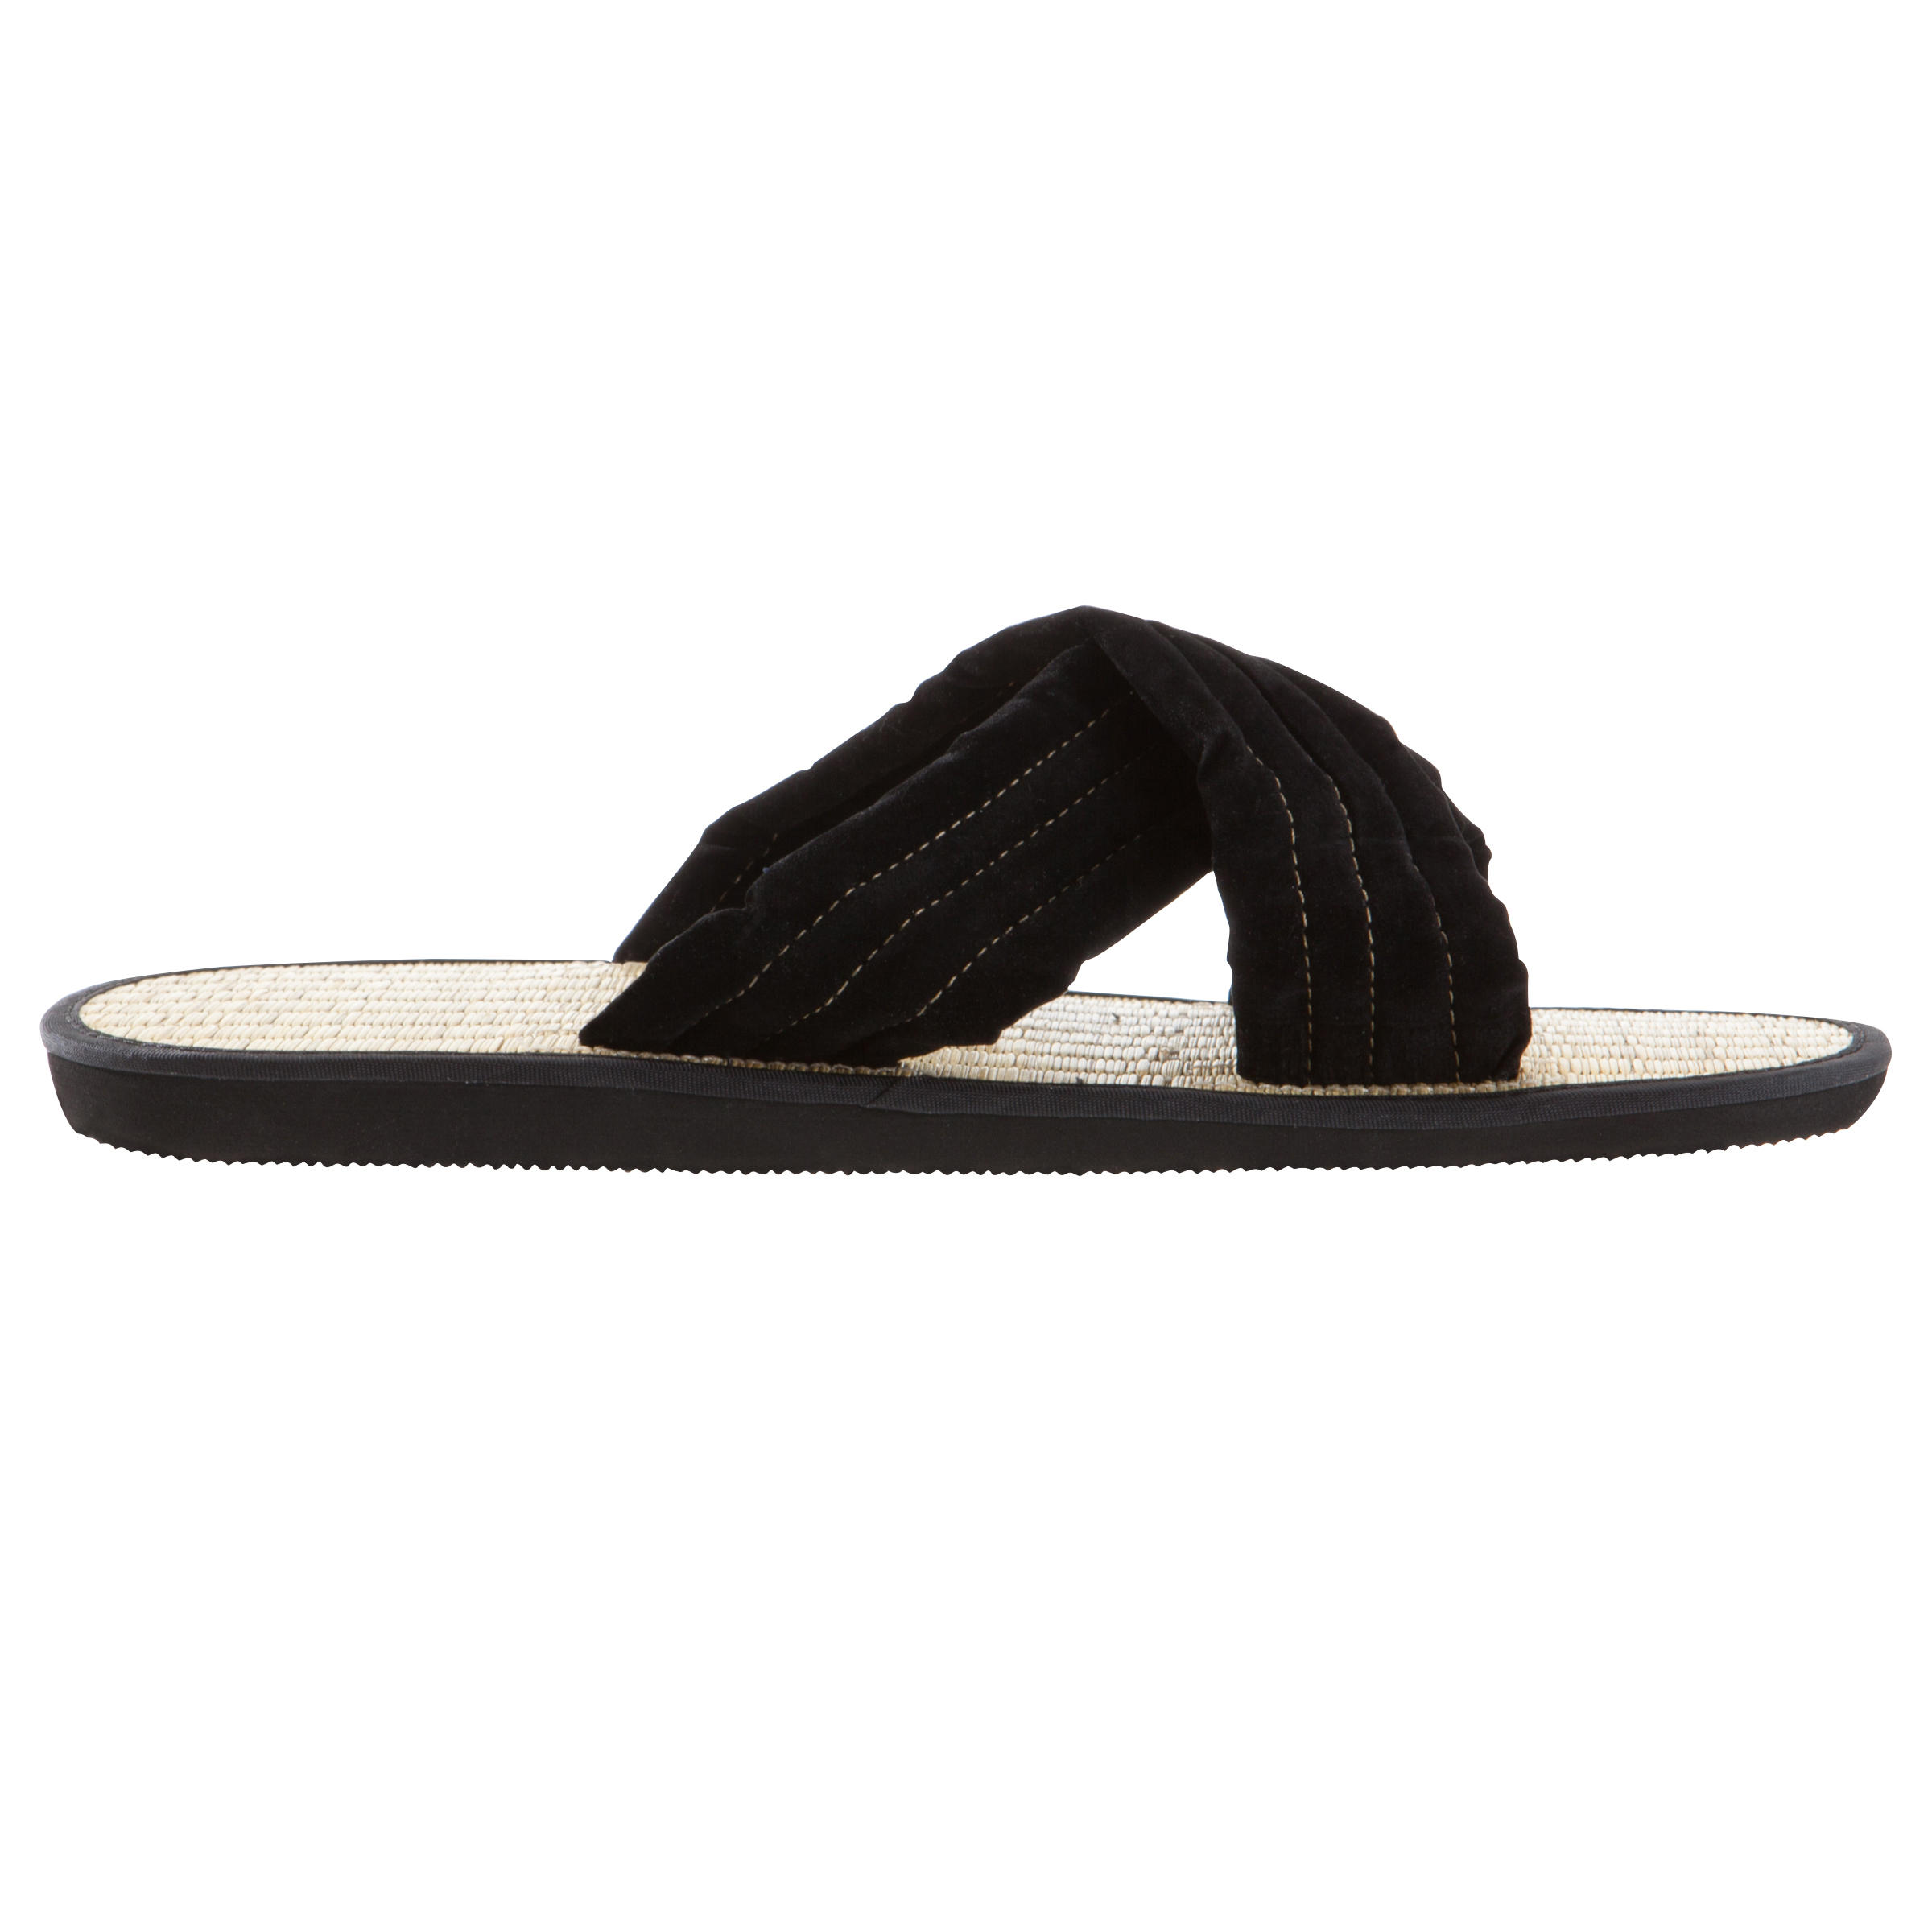 Kids' and Adult Martial Arts Zori Sandals 4/12